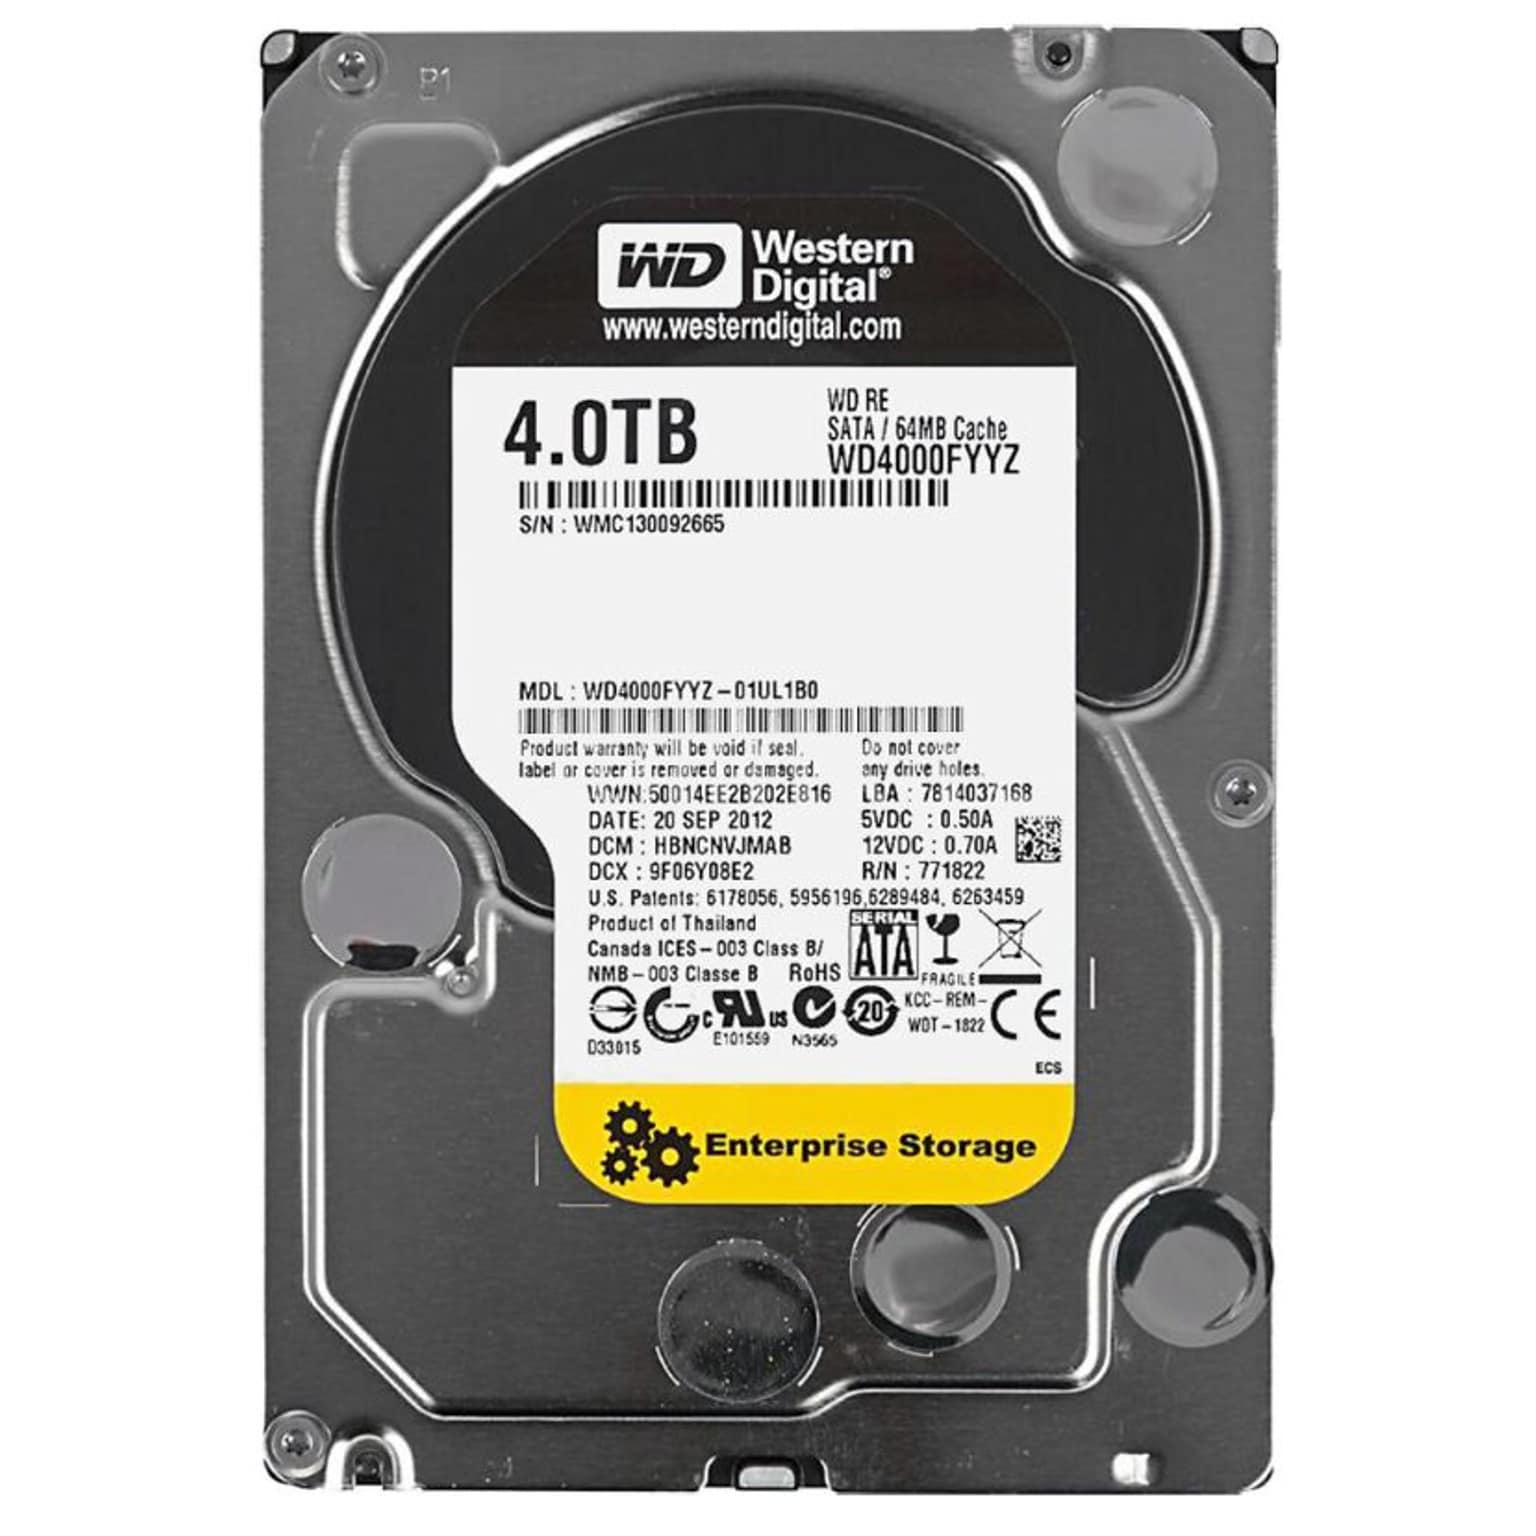 Western Digital RE 4TB 7200RPM SATA 6Gbps 64MB Cache 3.5-inch Internal Hard Drive, Certified Pre-Owned Product (WD4000FYYZ)